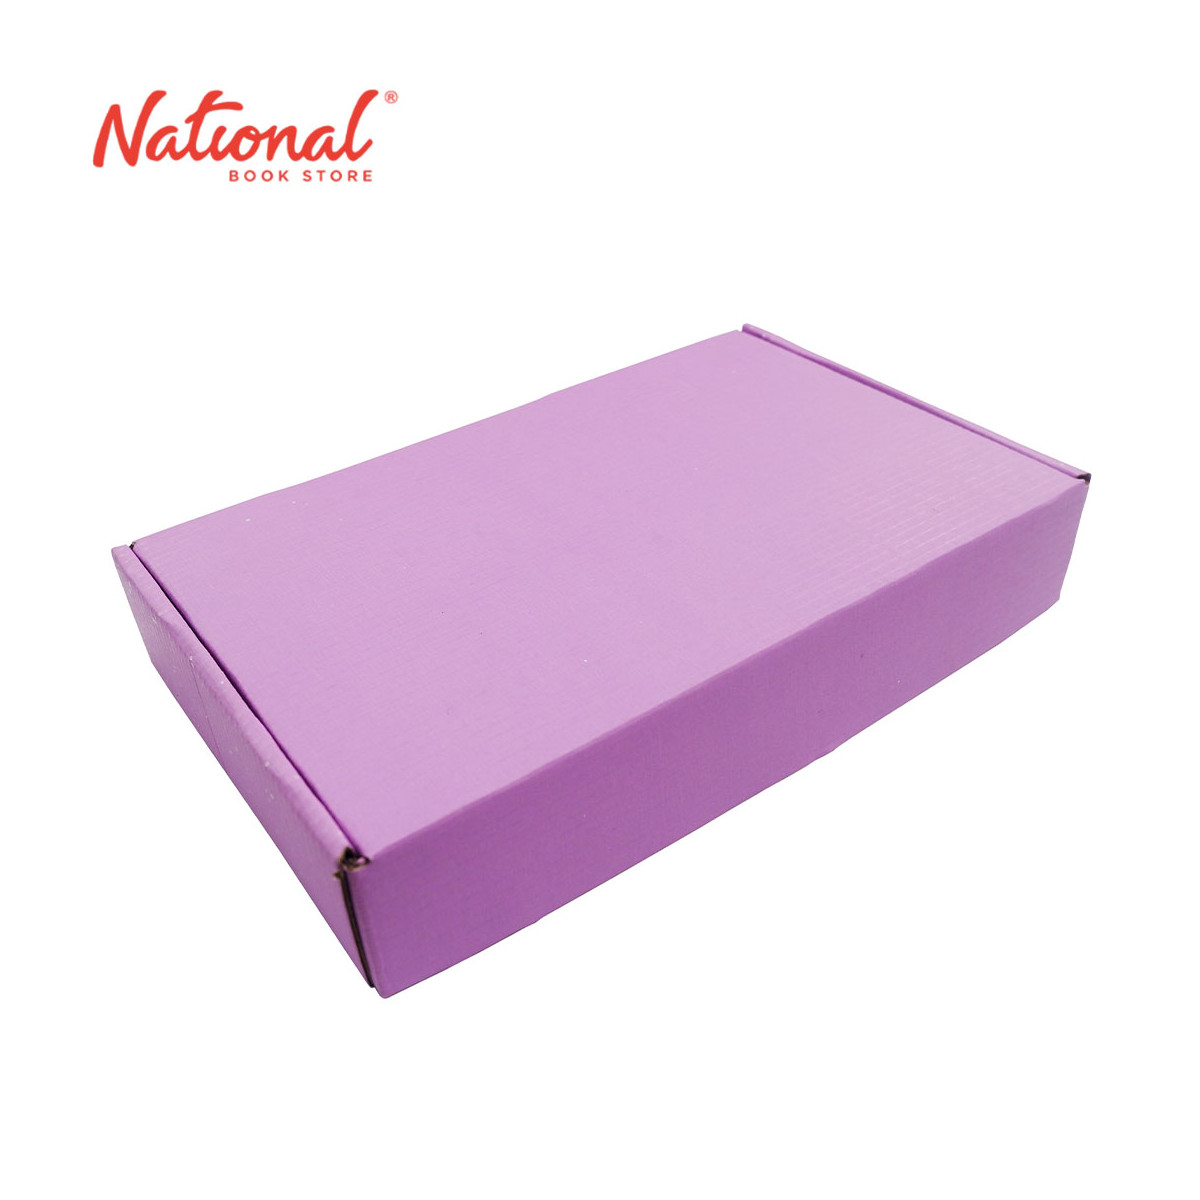 Mailer Box 265x160x47mm, Lavender (Upgrade Your Packaging) - Packaging Supplies